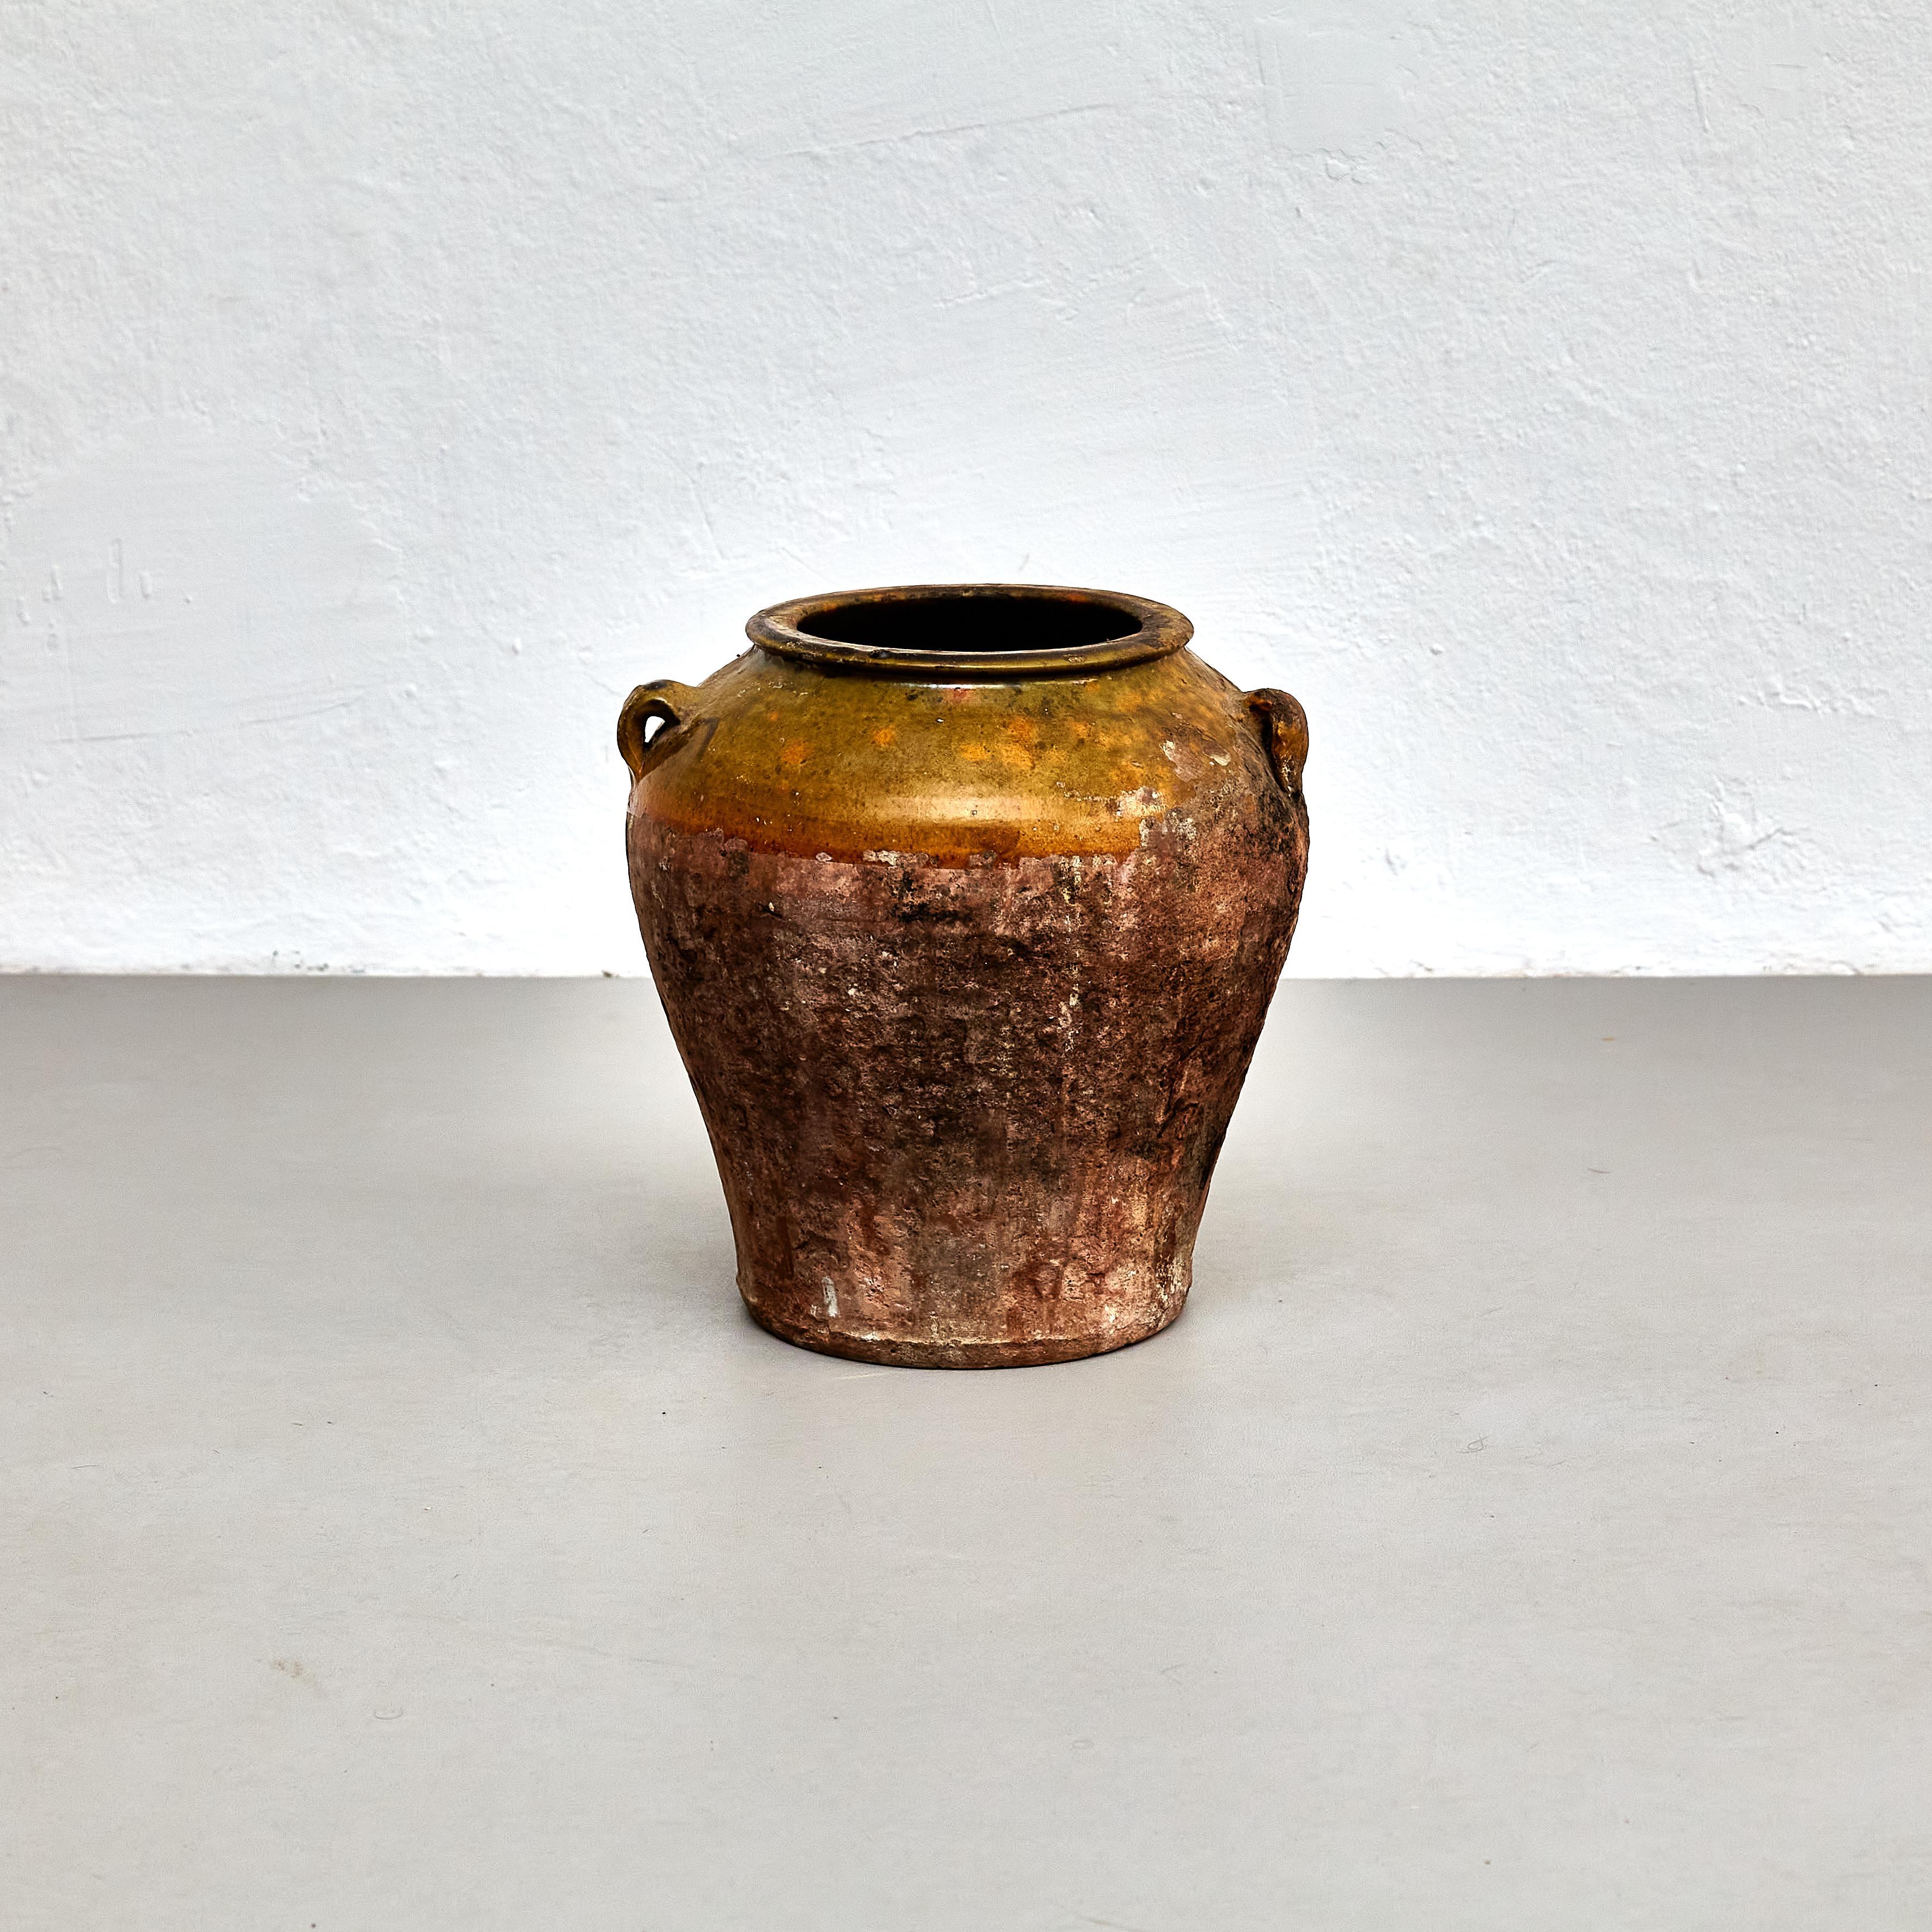 Early 20th century traditional Spanish ceramic vase.

Manufactured in Spain, early 20th century.

In original condition with minor wear consistent of age and use, preserving a beautiful patina.

Materials: 
Ceramic

Dimensions: 
Diam 32 cm x H 33